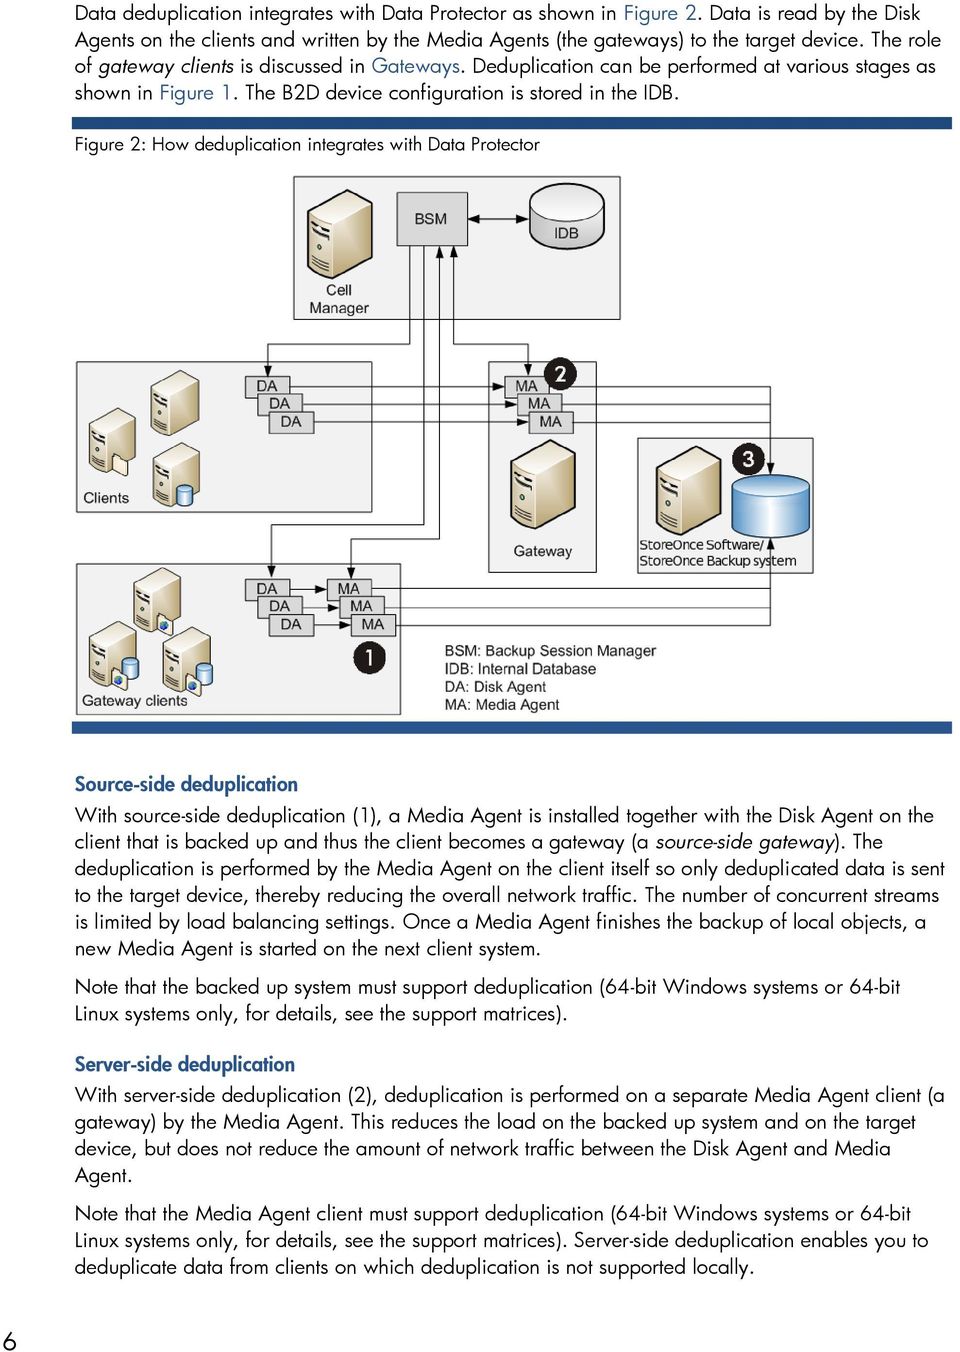 Figure 2: How deduplication integrates with Data Protector Source-side deduplication With source-side deduplication (1), a Media Agent is installed together with the Disk Agent on the client that is